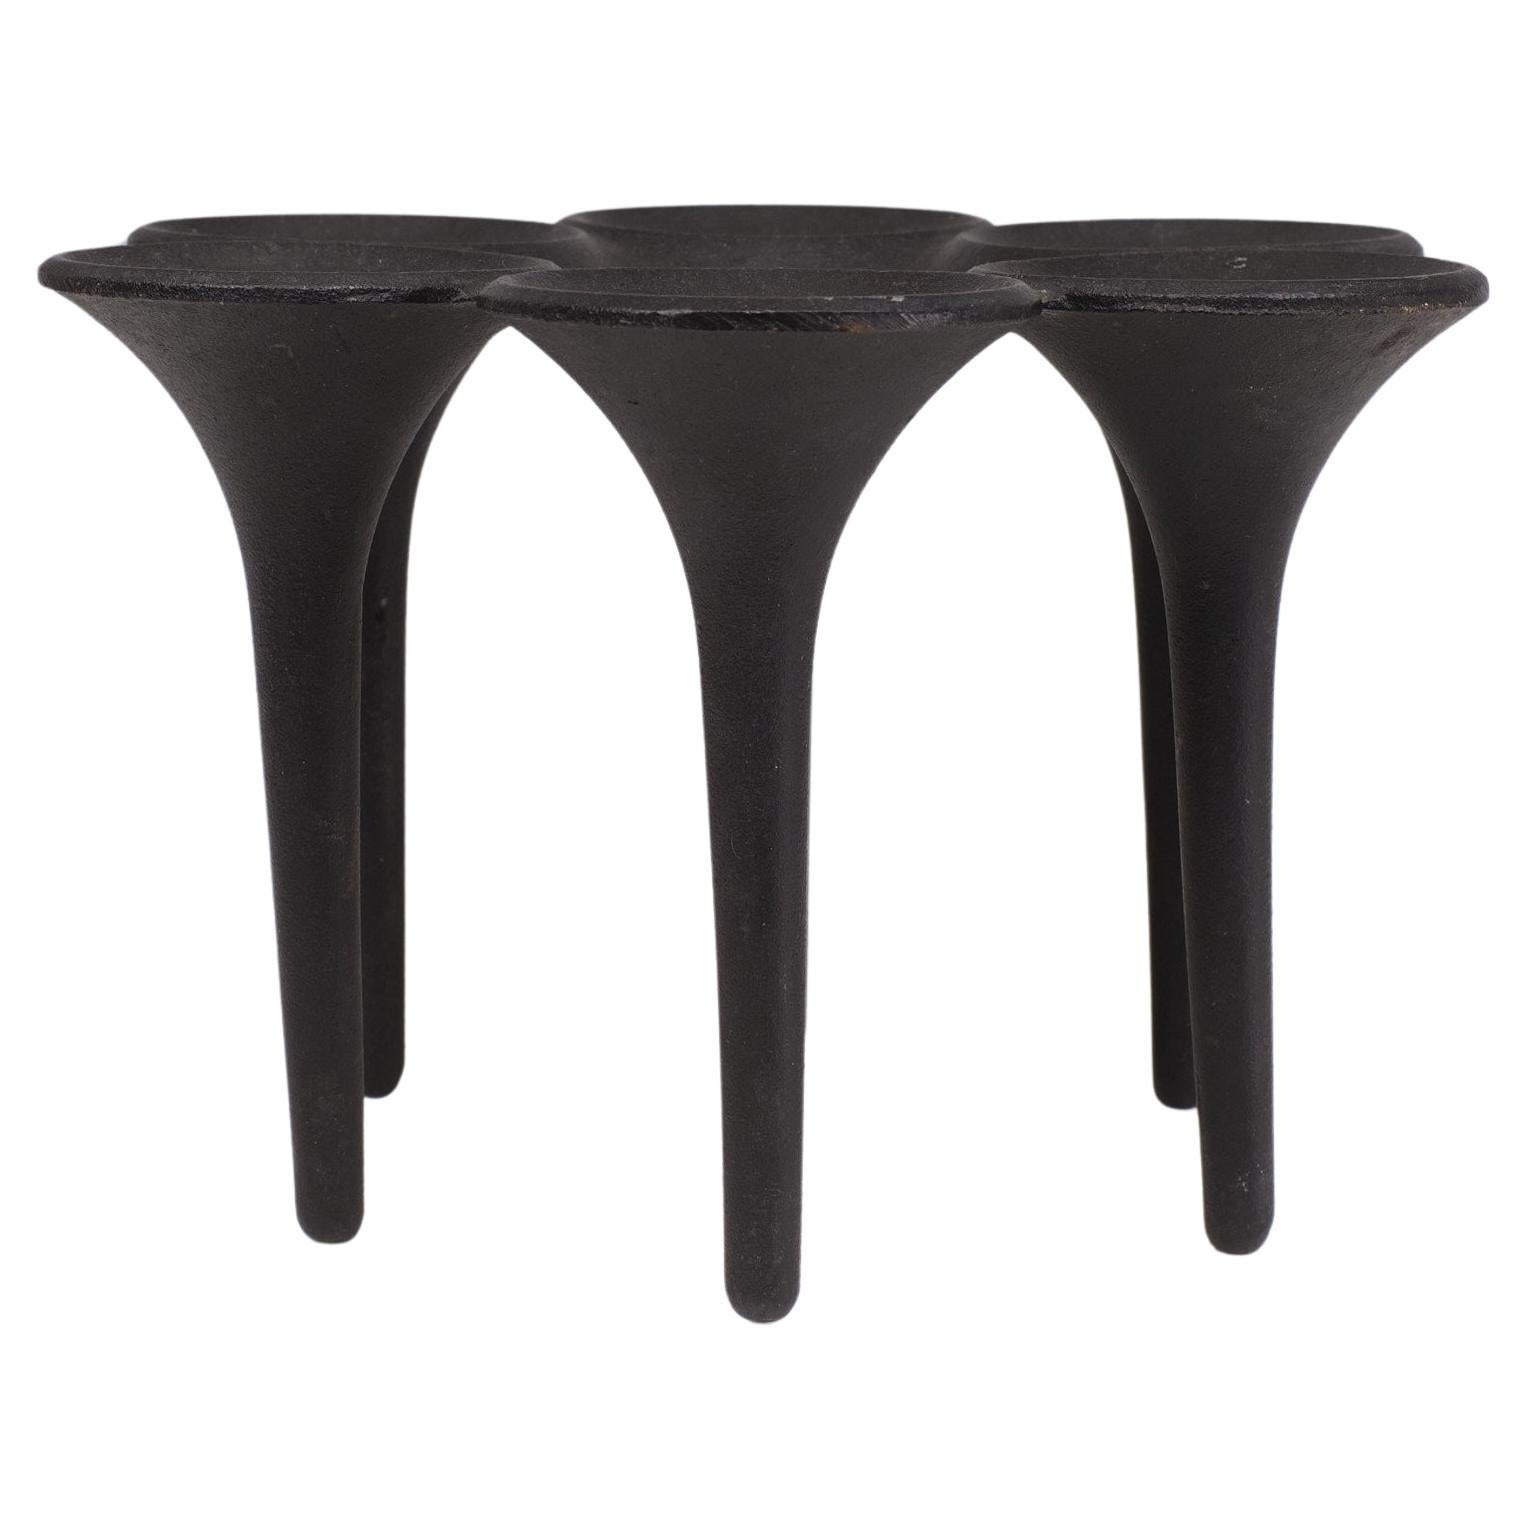 HOLMGREN ILLUMS BOLIGHUS. A  cast iron candle holder. The way they make the cast iron, gives them a structure on the surface. It looks very basic, natural and strong. They are really heavy.  The  are marked with made in Denmark.
There are Six  holes